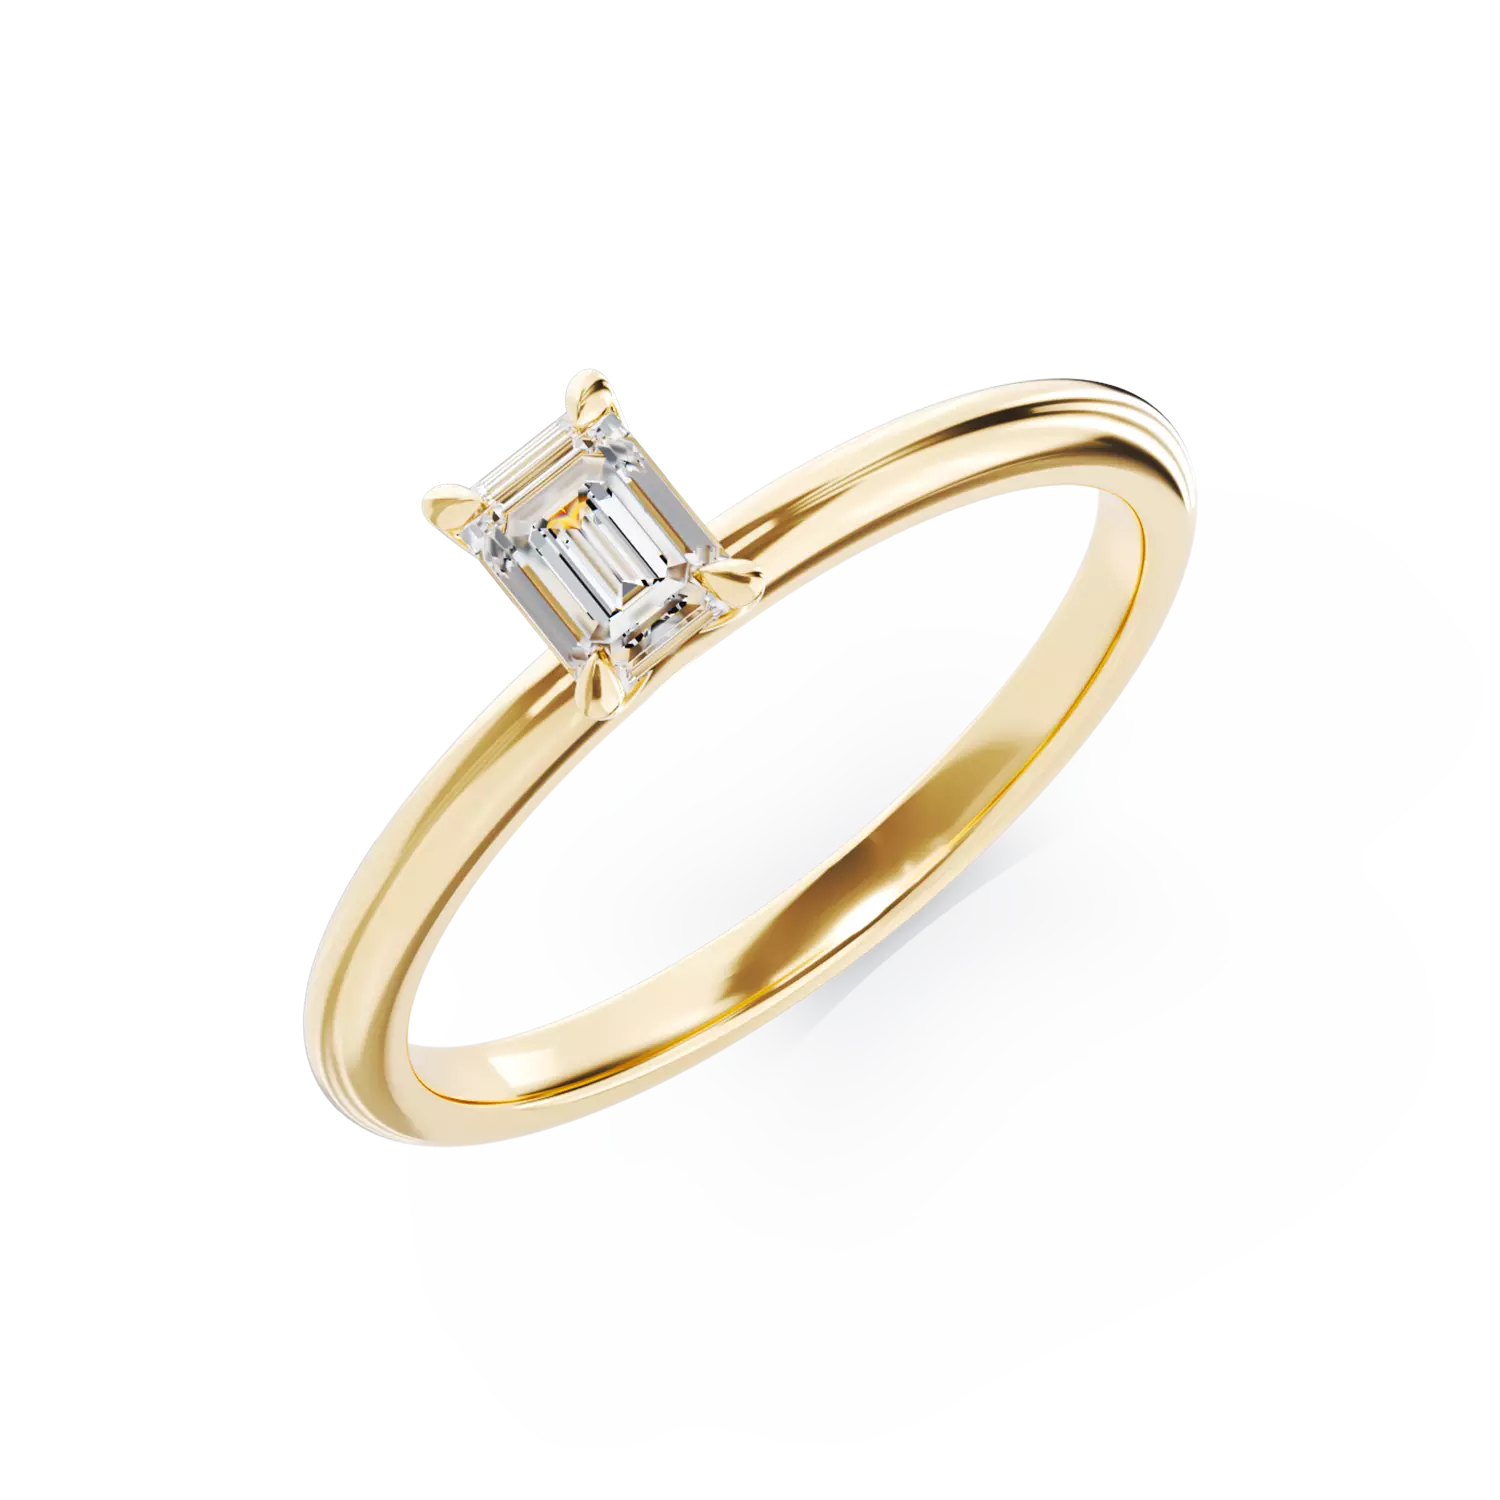 18k yellow gold engagement ring with a 0.4ct solitaire diamond